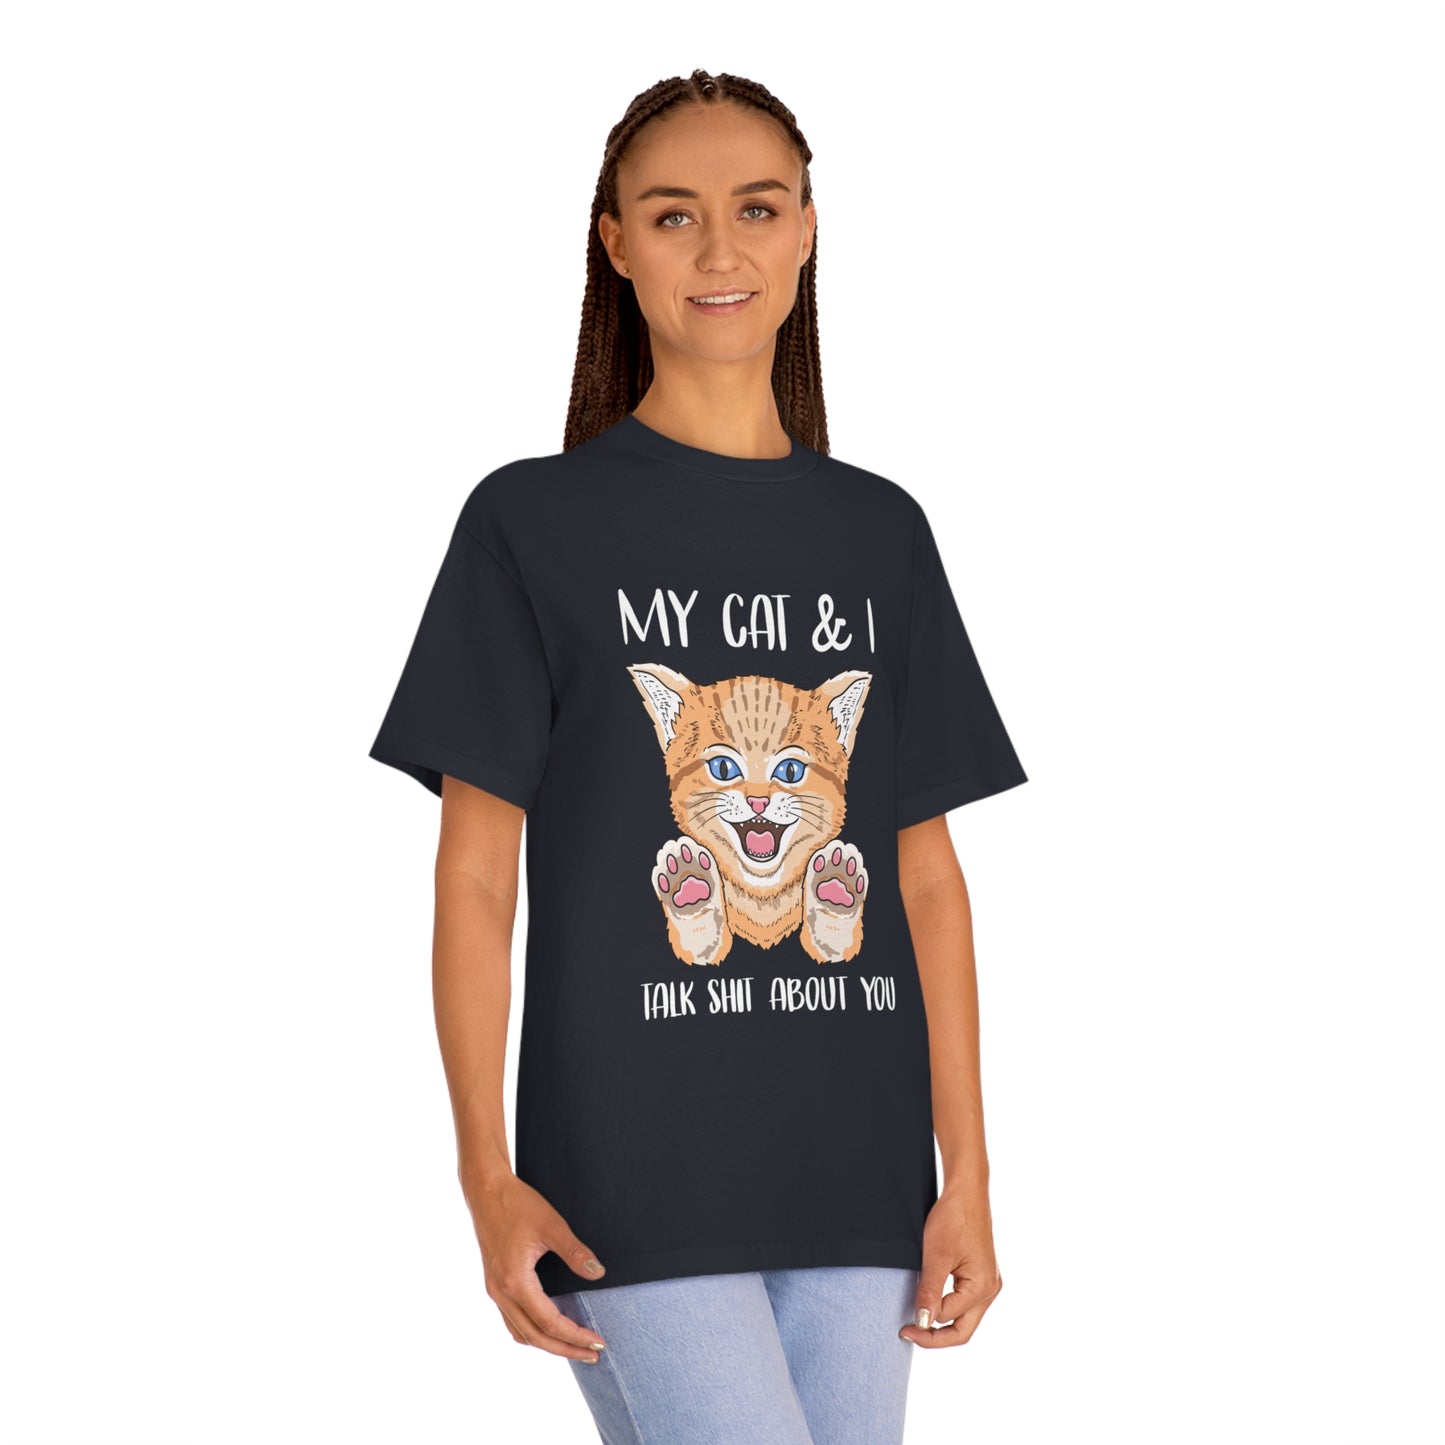 MY cat and i talk shit about you Unisex Classic Tee